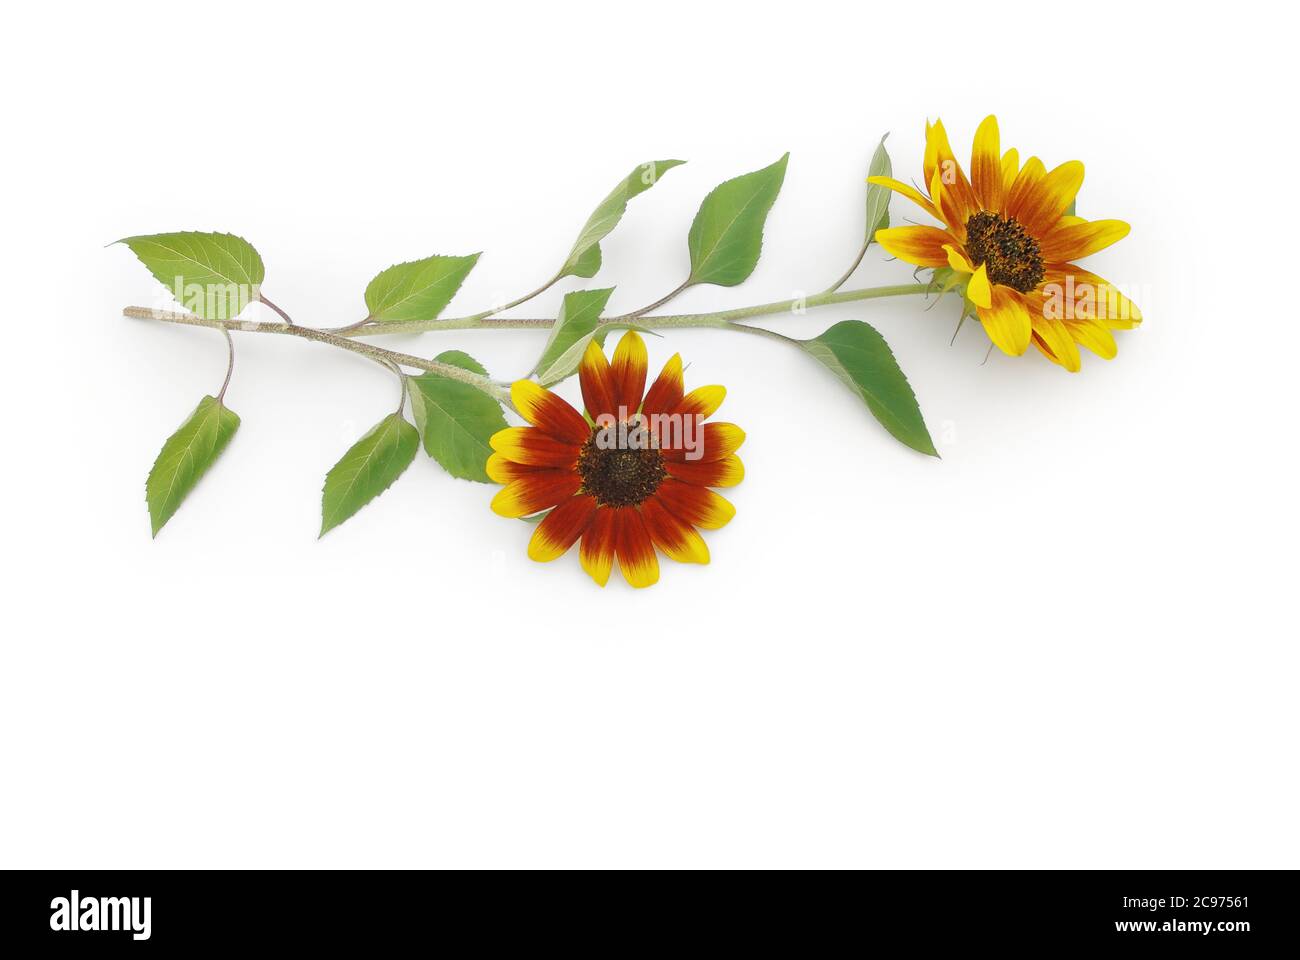 Two-tone sunflowers are arranged on a white background Stock Photo